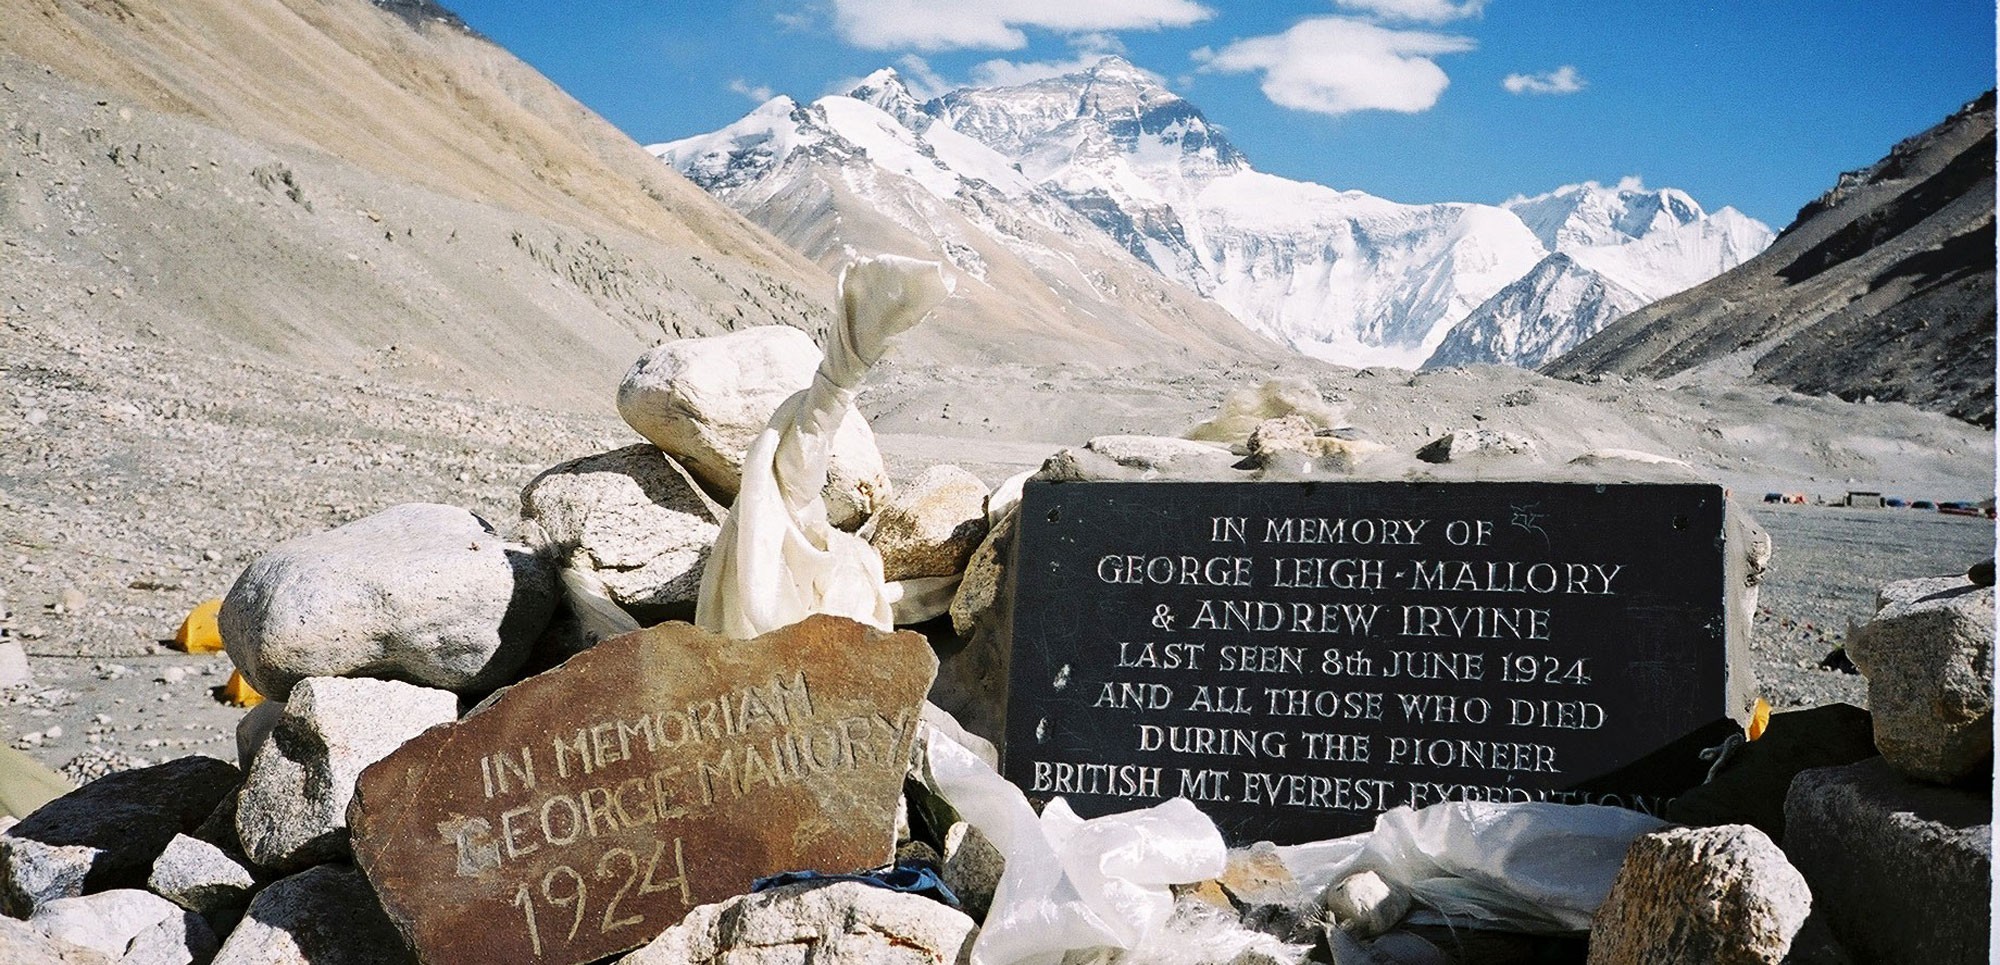 Mallory and Irvine's memorial plaque at Everest Base Camp in Tibet